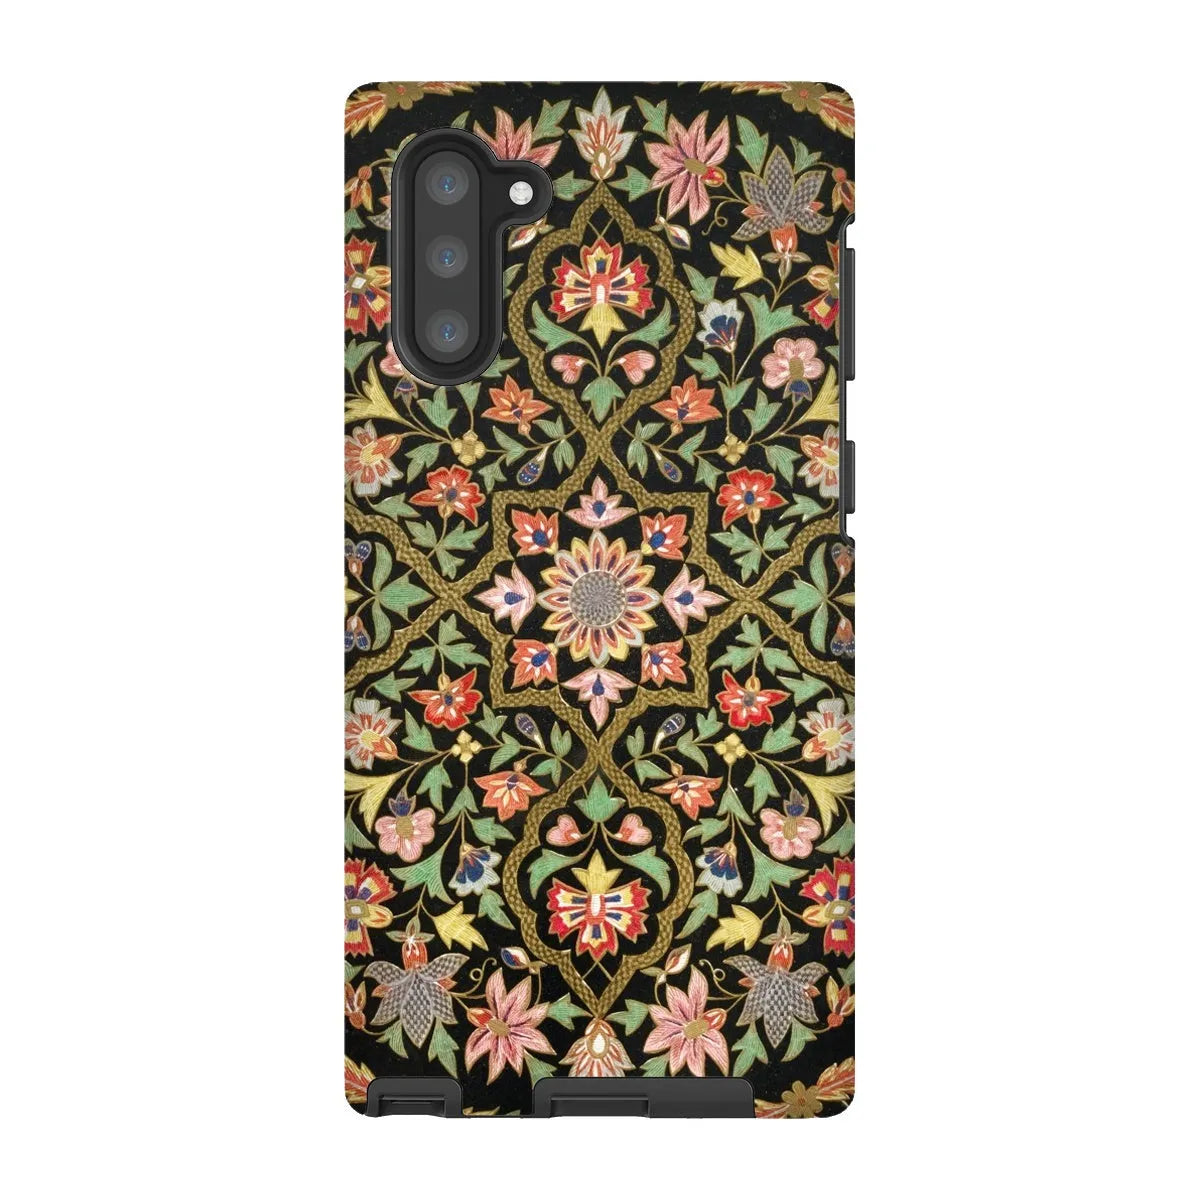 Indian Embroidery - Aesthetic Pattern Art Phone Case - Samsung Galaxy Note 10 / Matte - Mobile Phone Cases - Aesthetic